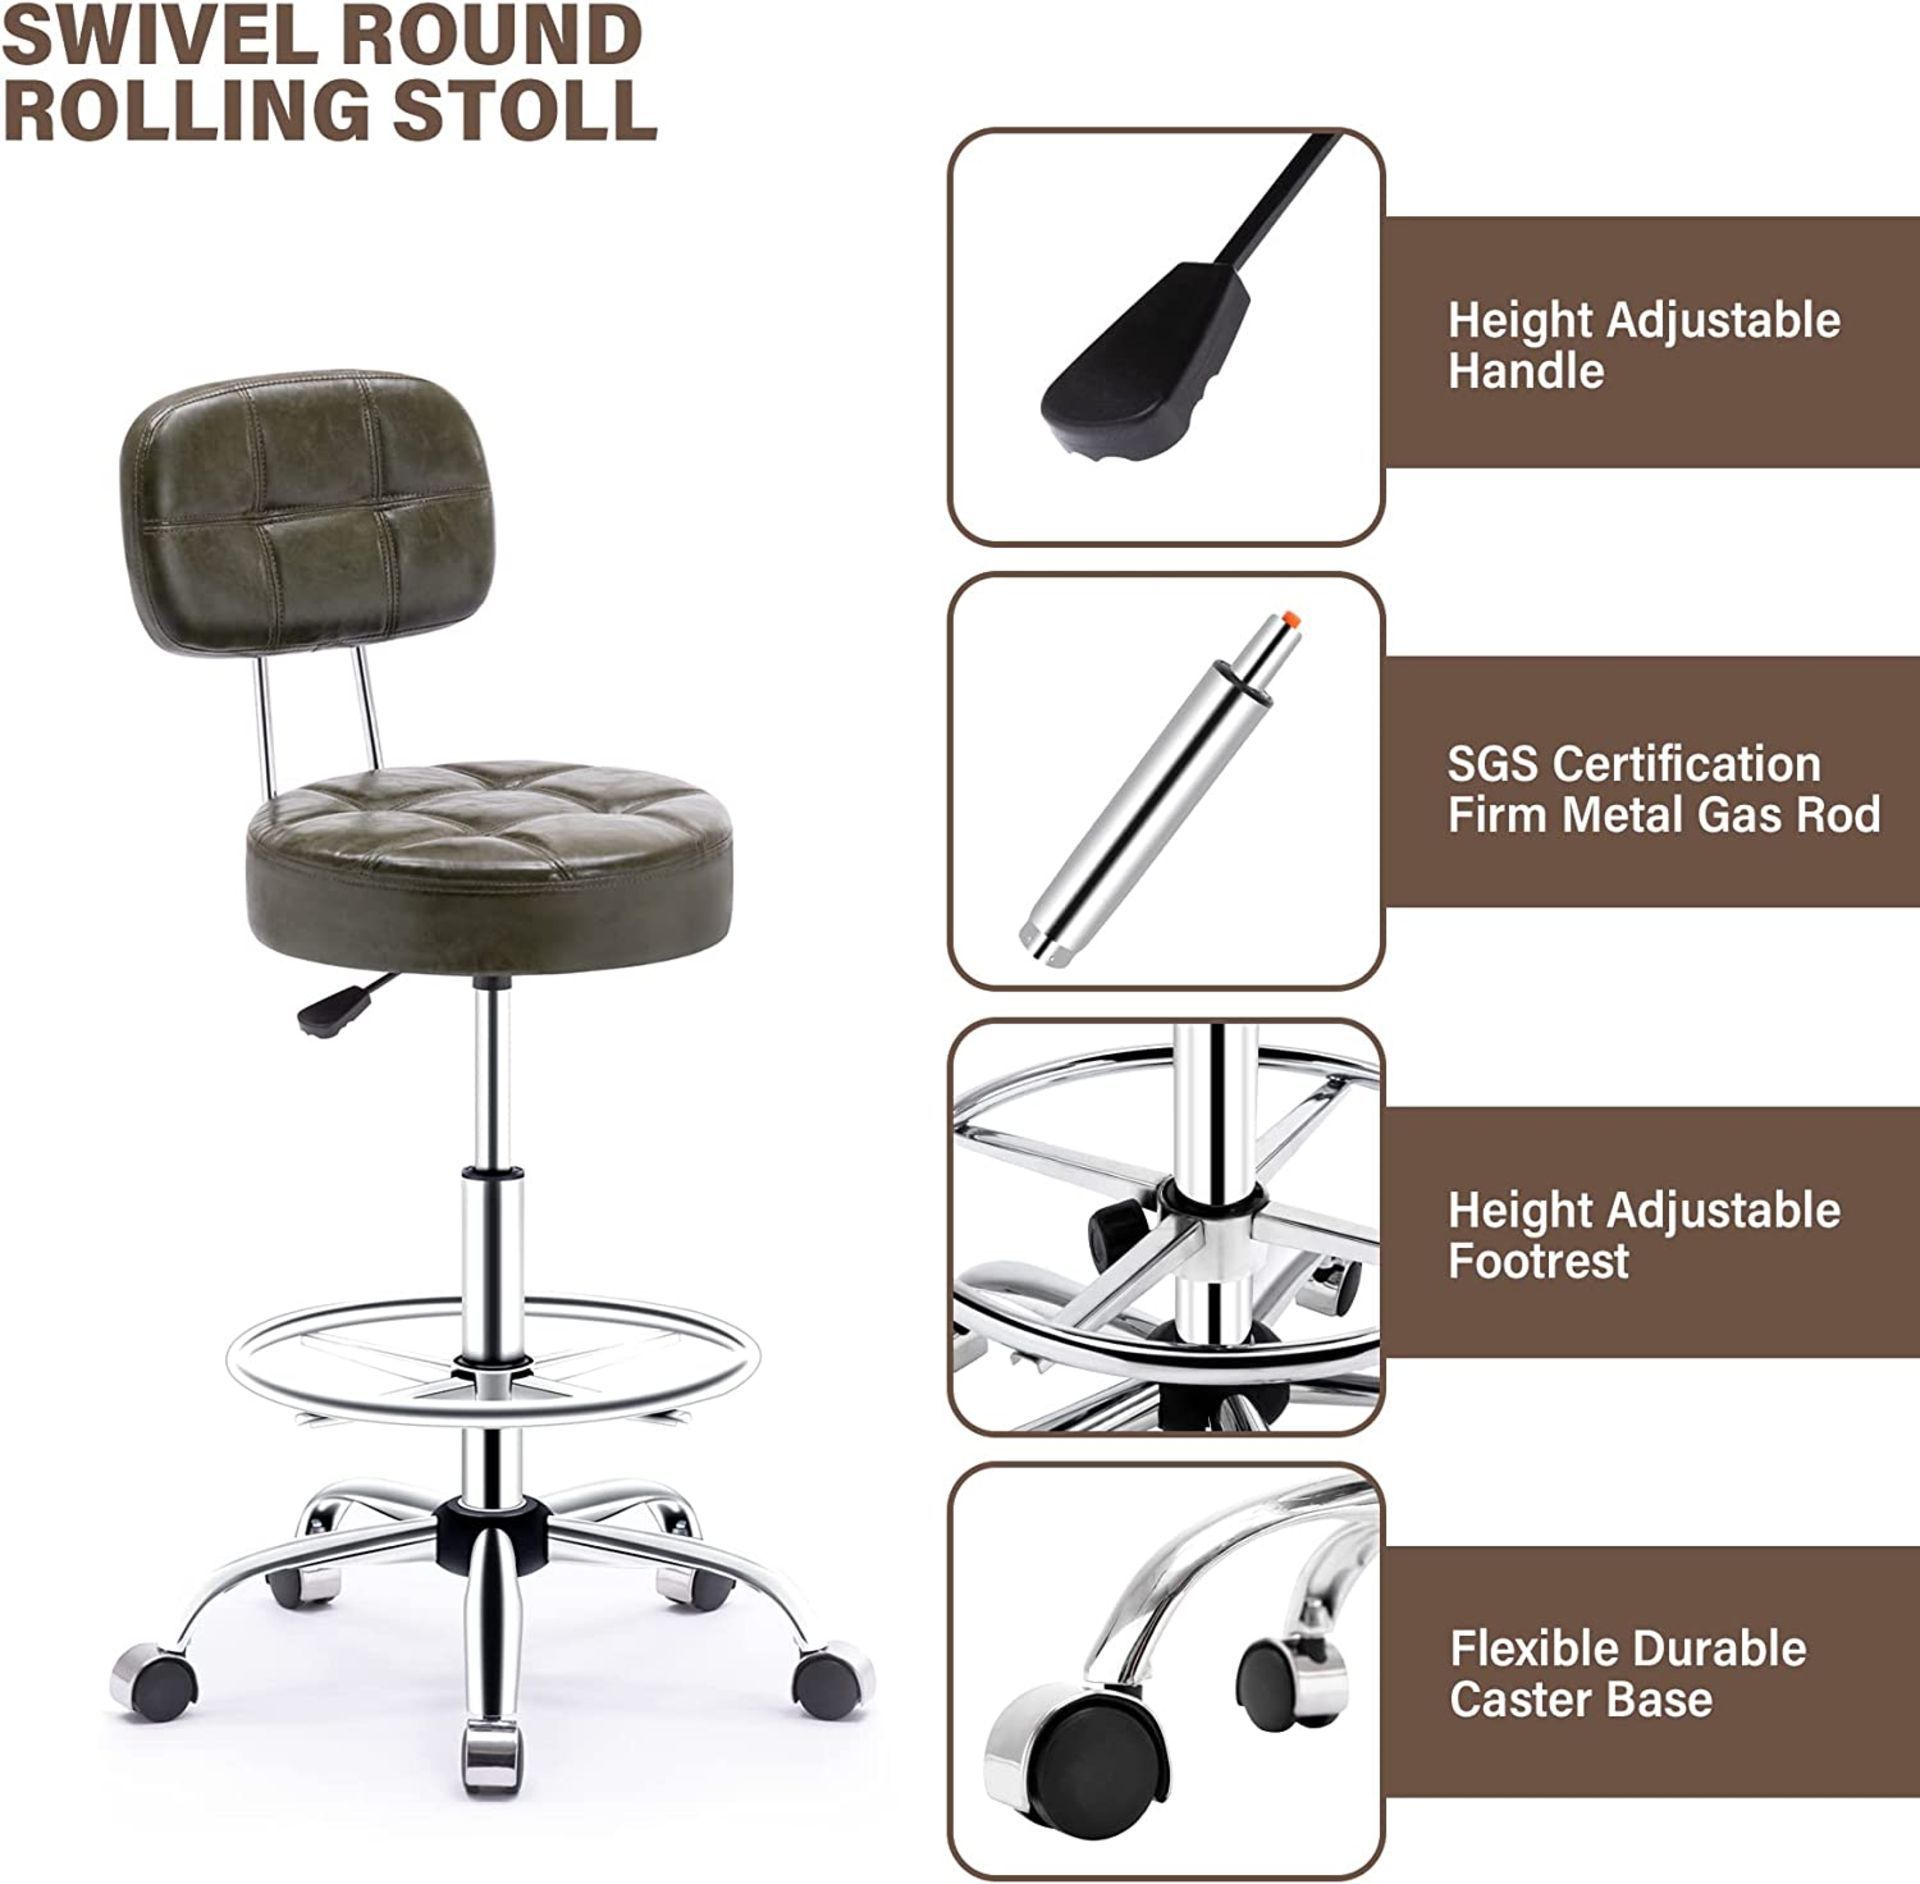 NEW Rolling stool with High Backrest and Adjustable Footrest, Leather Massage Stool Ergonomic - Image 4 of 4